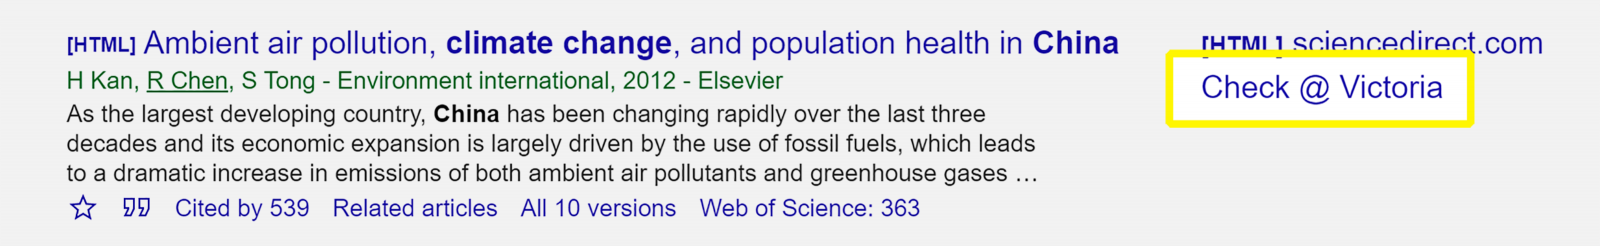 Screenshot of Google Scholar search result showing Check @ Victoria link